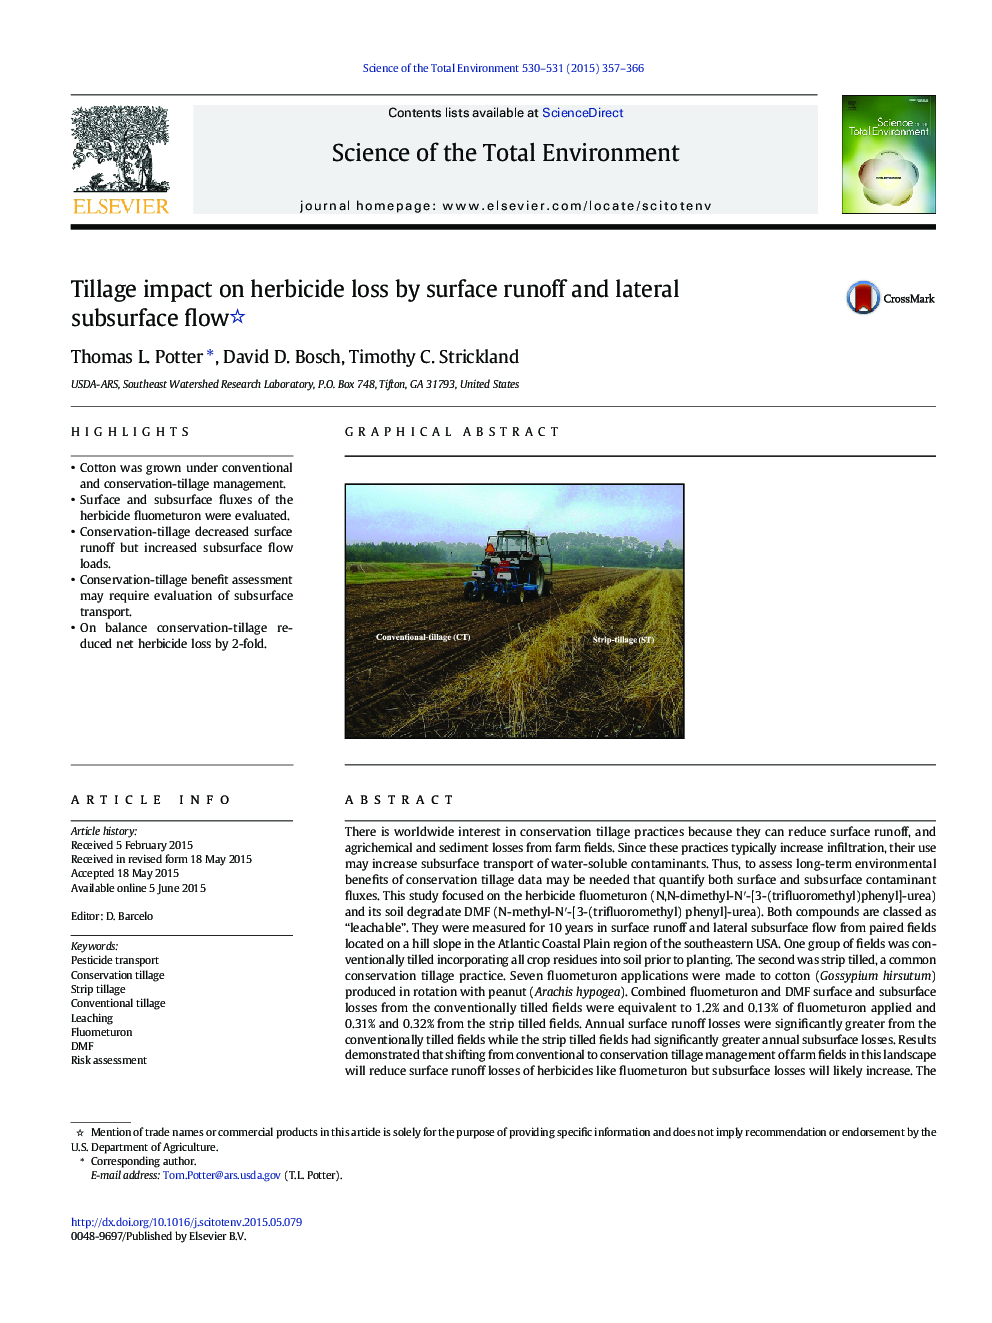 Tillage impact on herbicide loss by surface runoff and lateral subsurface flow